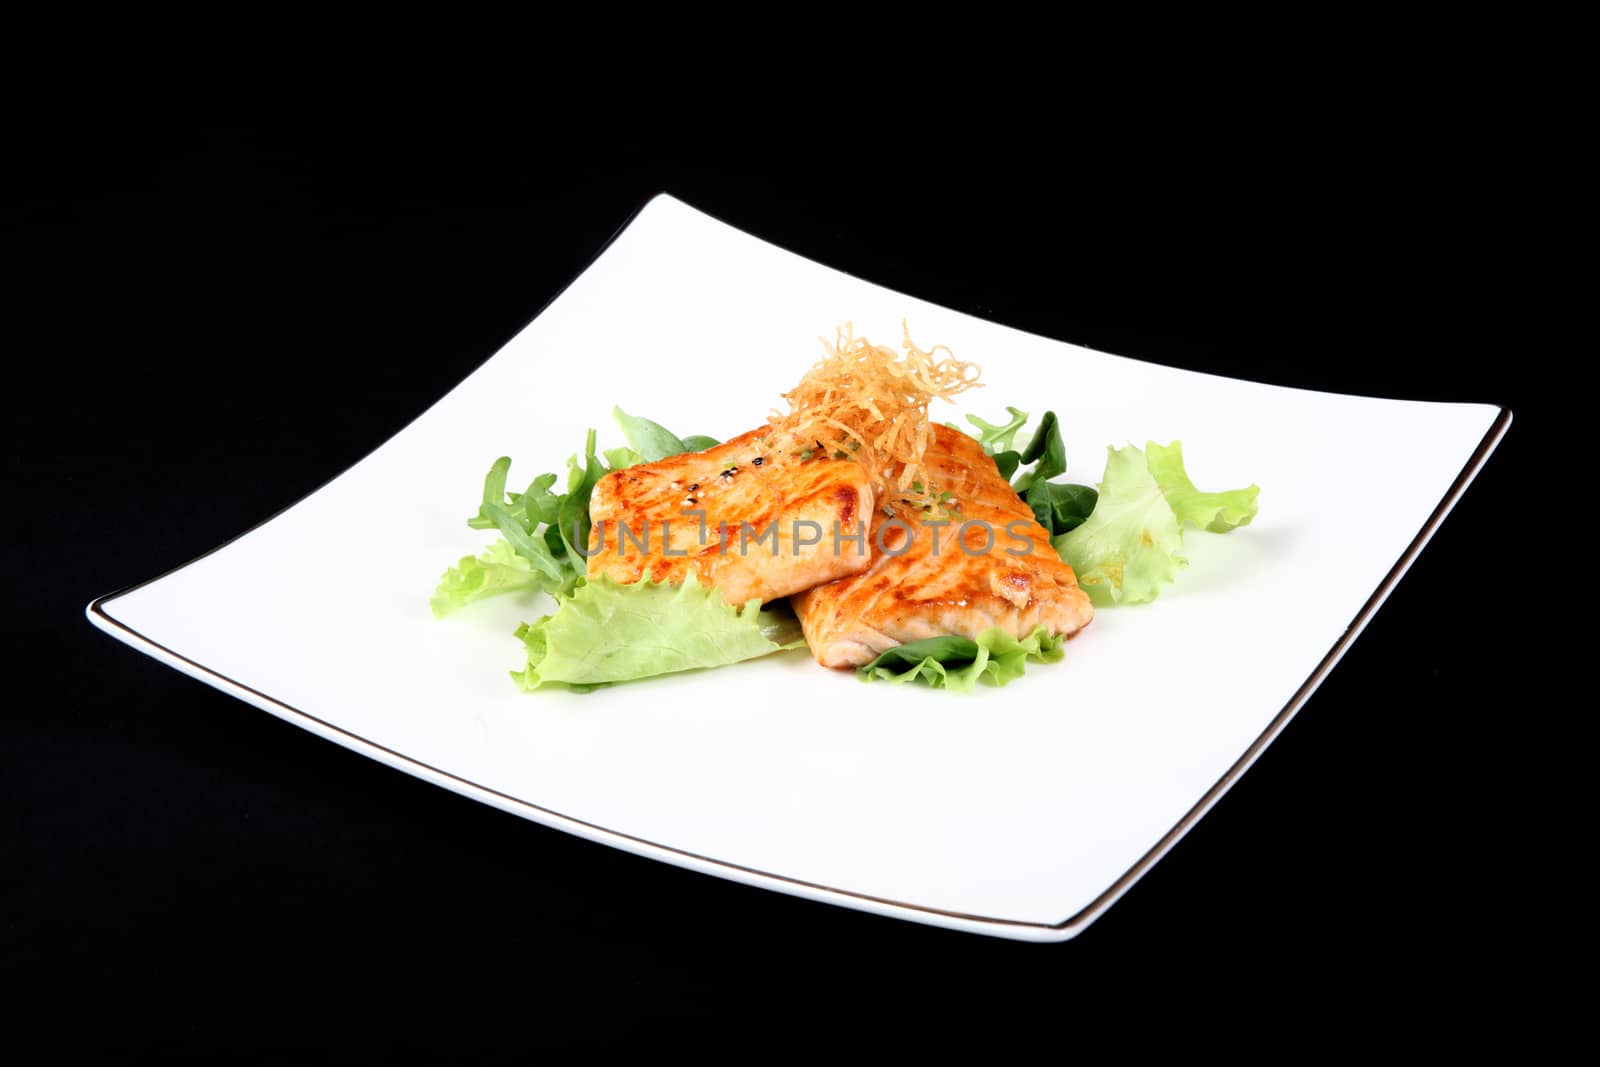 grilled salmon on square plate, black background